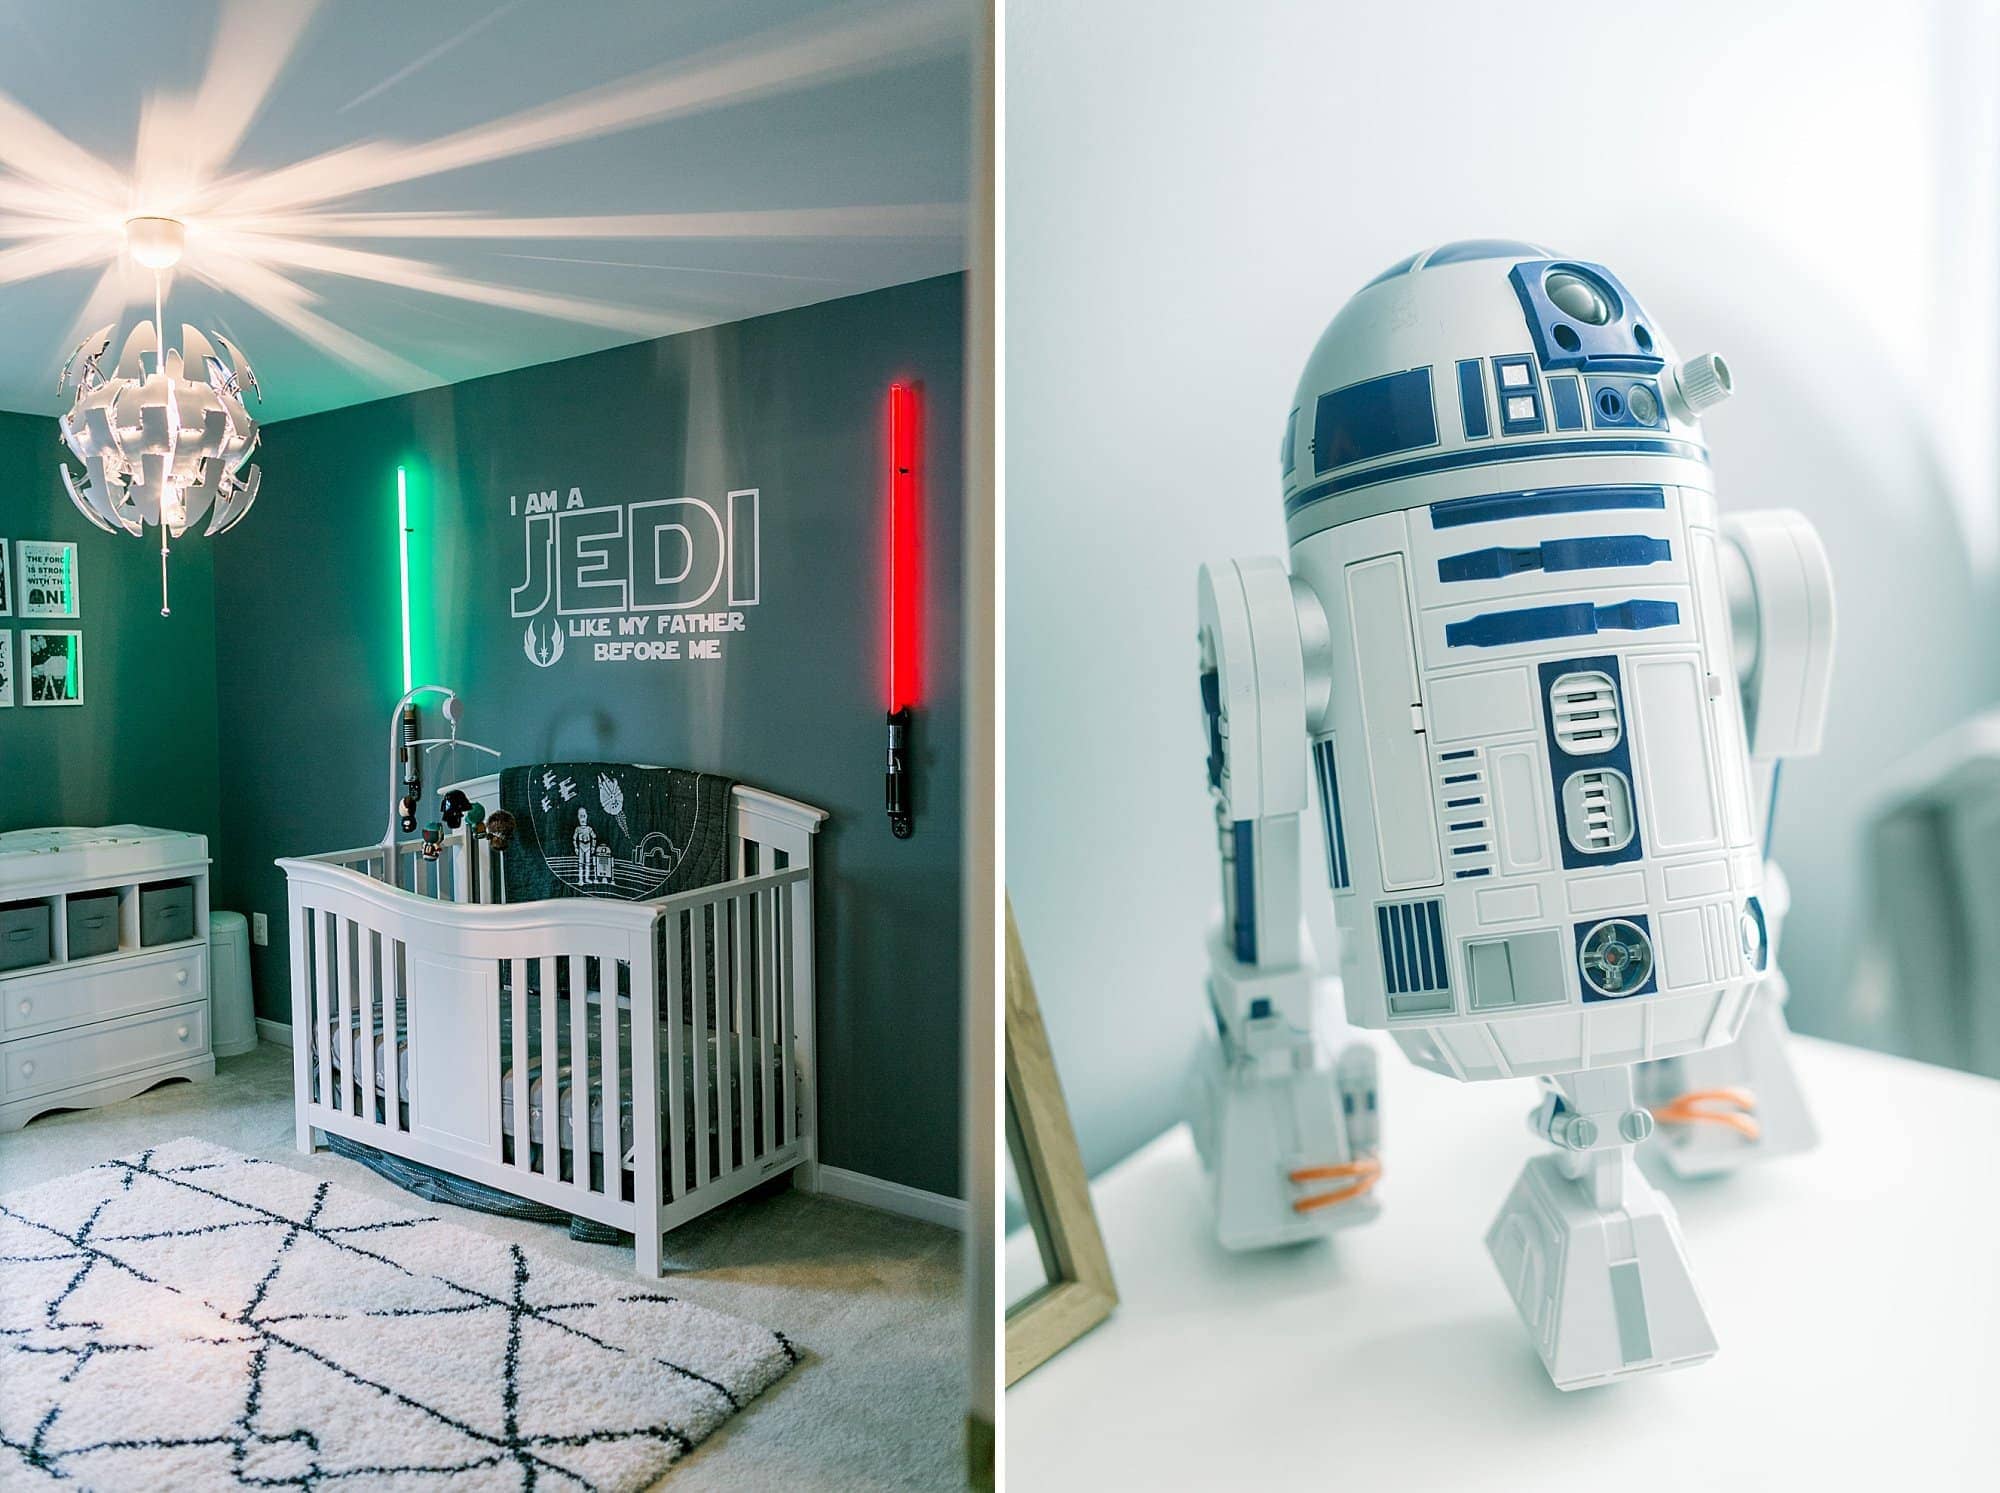 Star wars nursery - r2d2 model on dresser, green and red lightsabers lit up on wall over white crib in gray room